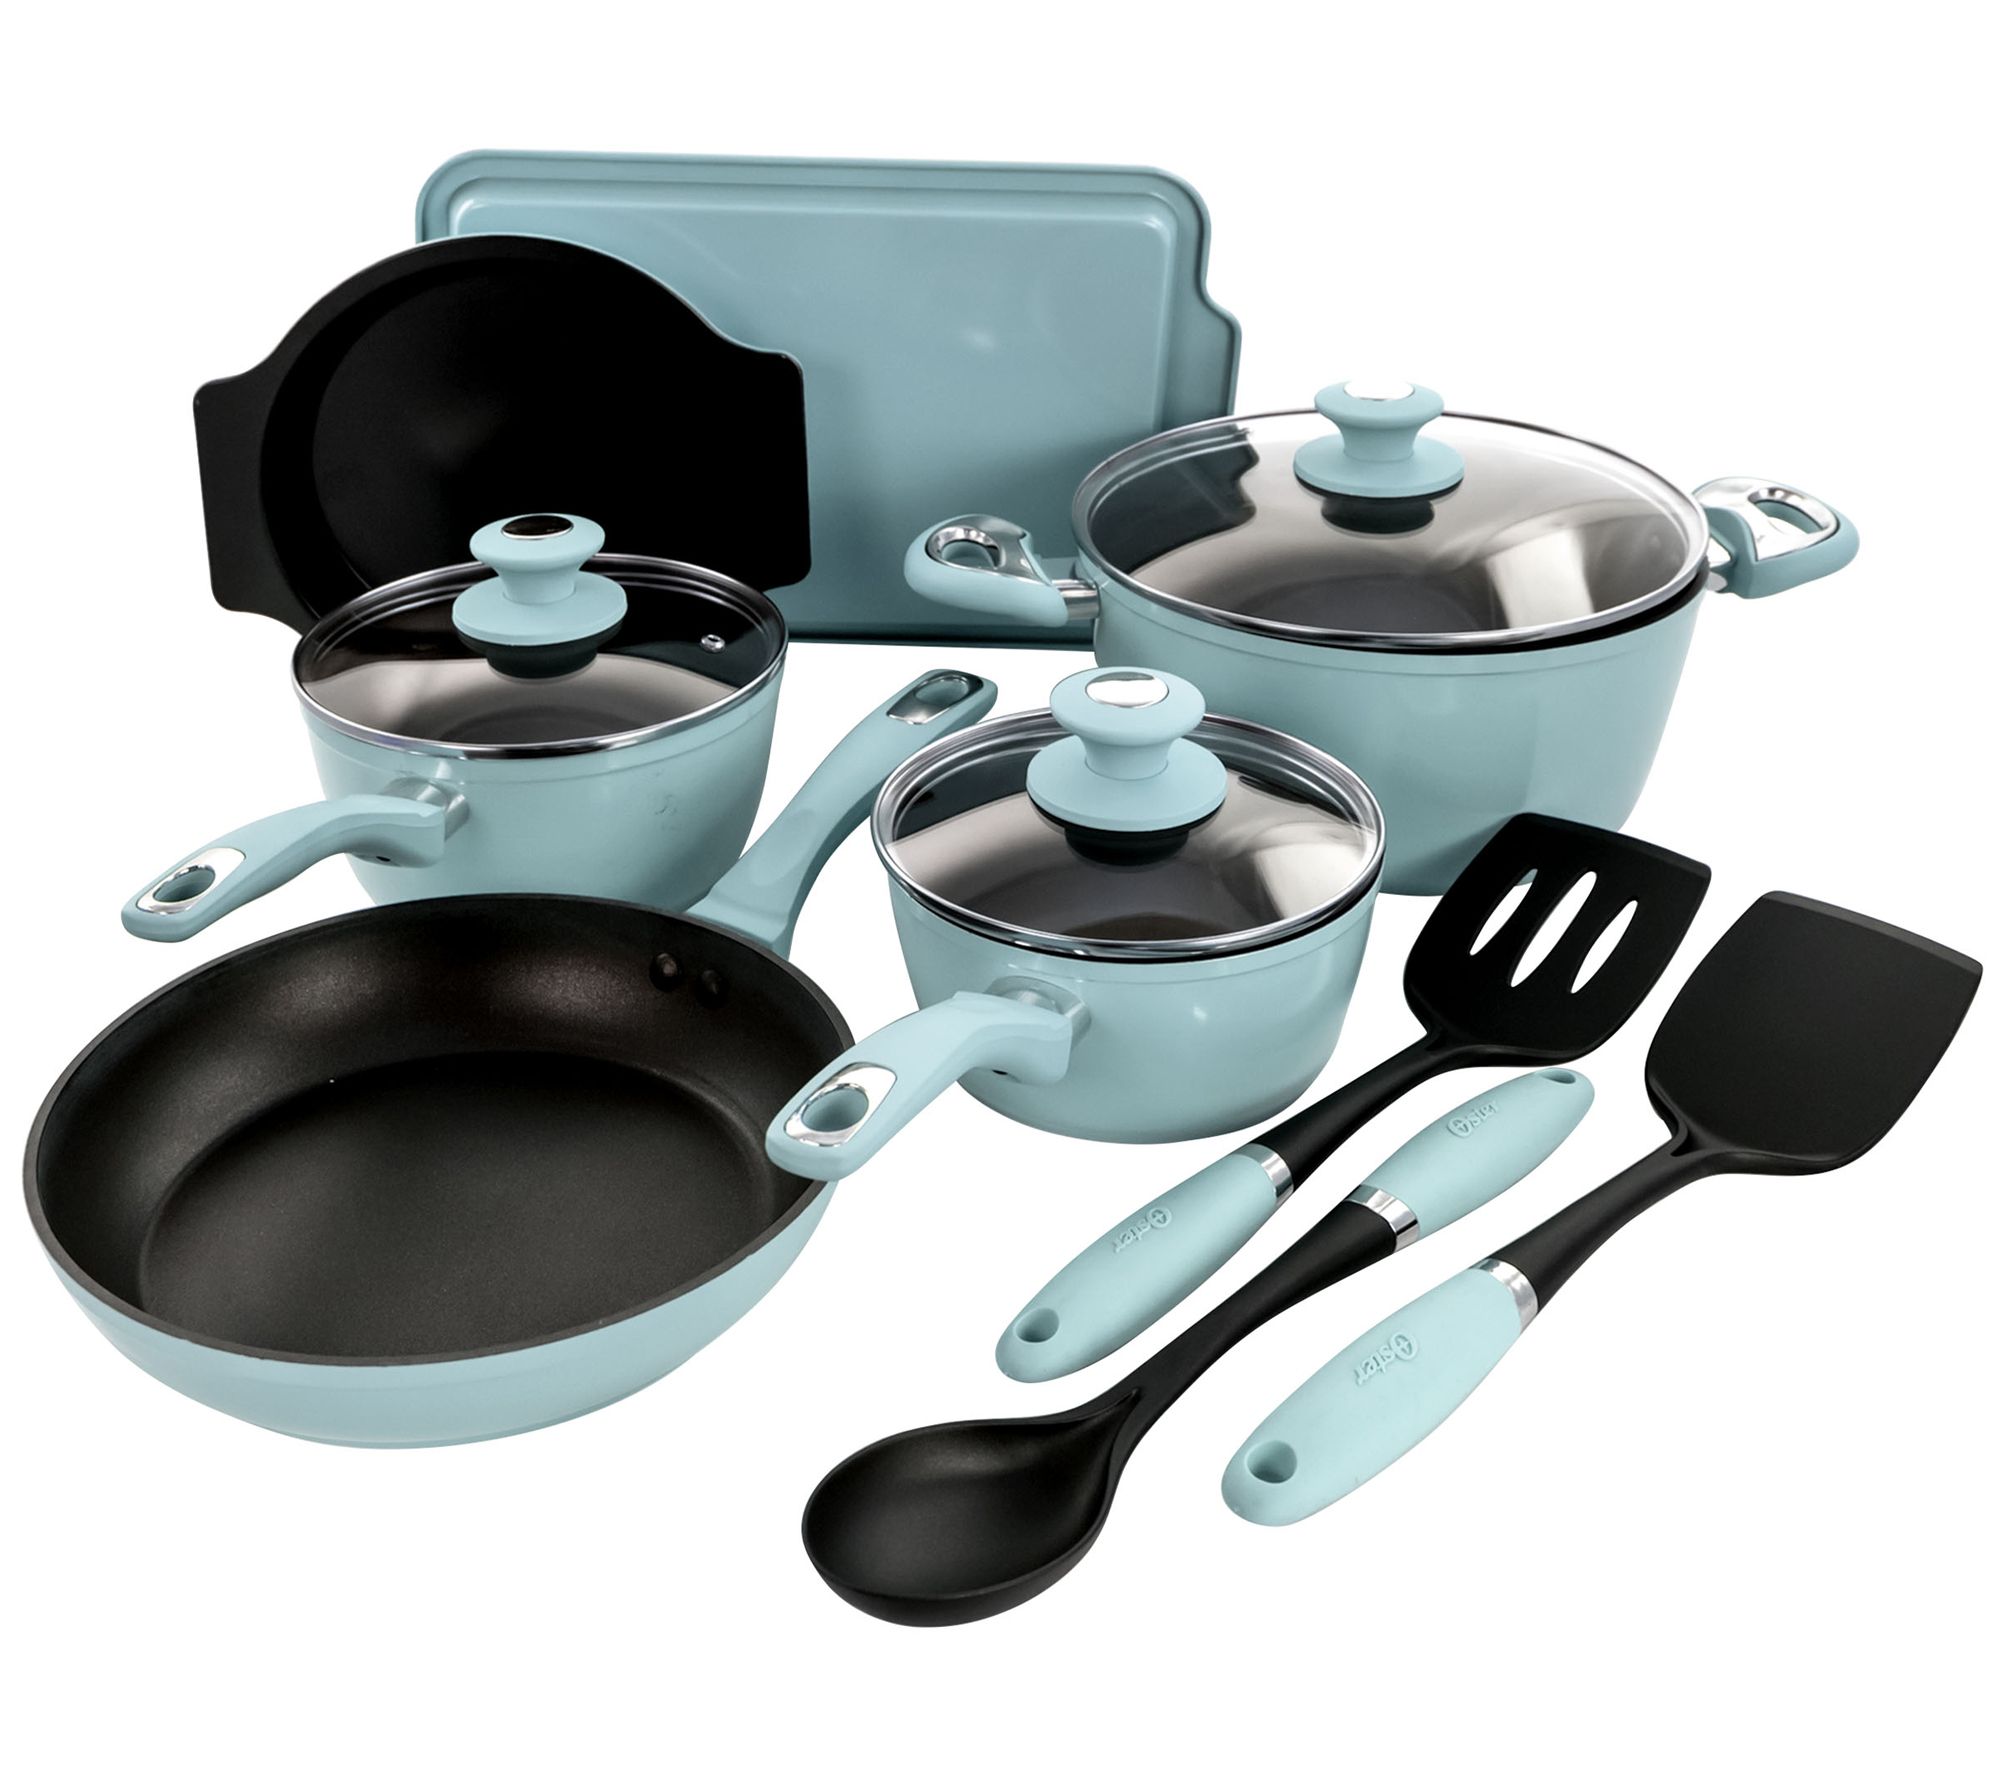 The Pioneer Woman 12 Piece Ceramic Non-stick Cookware Set - Green